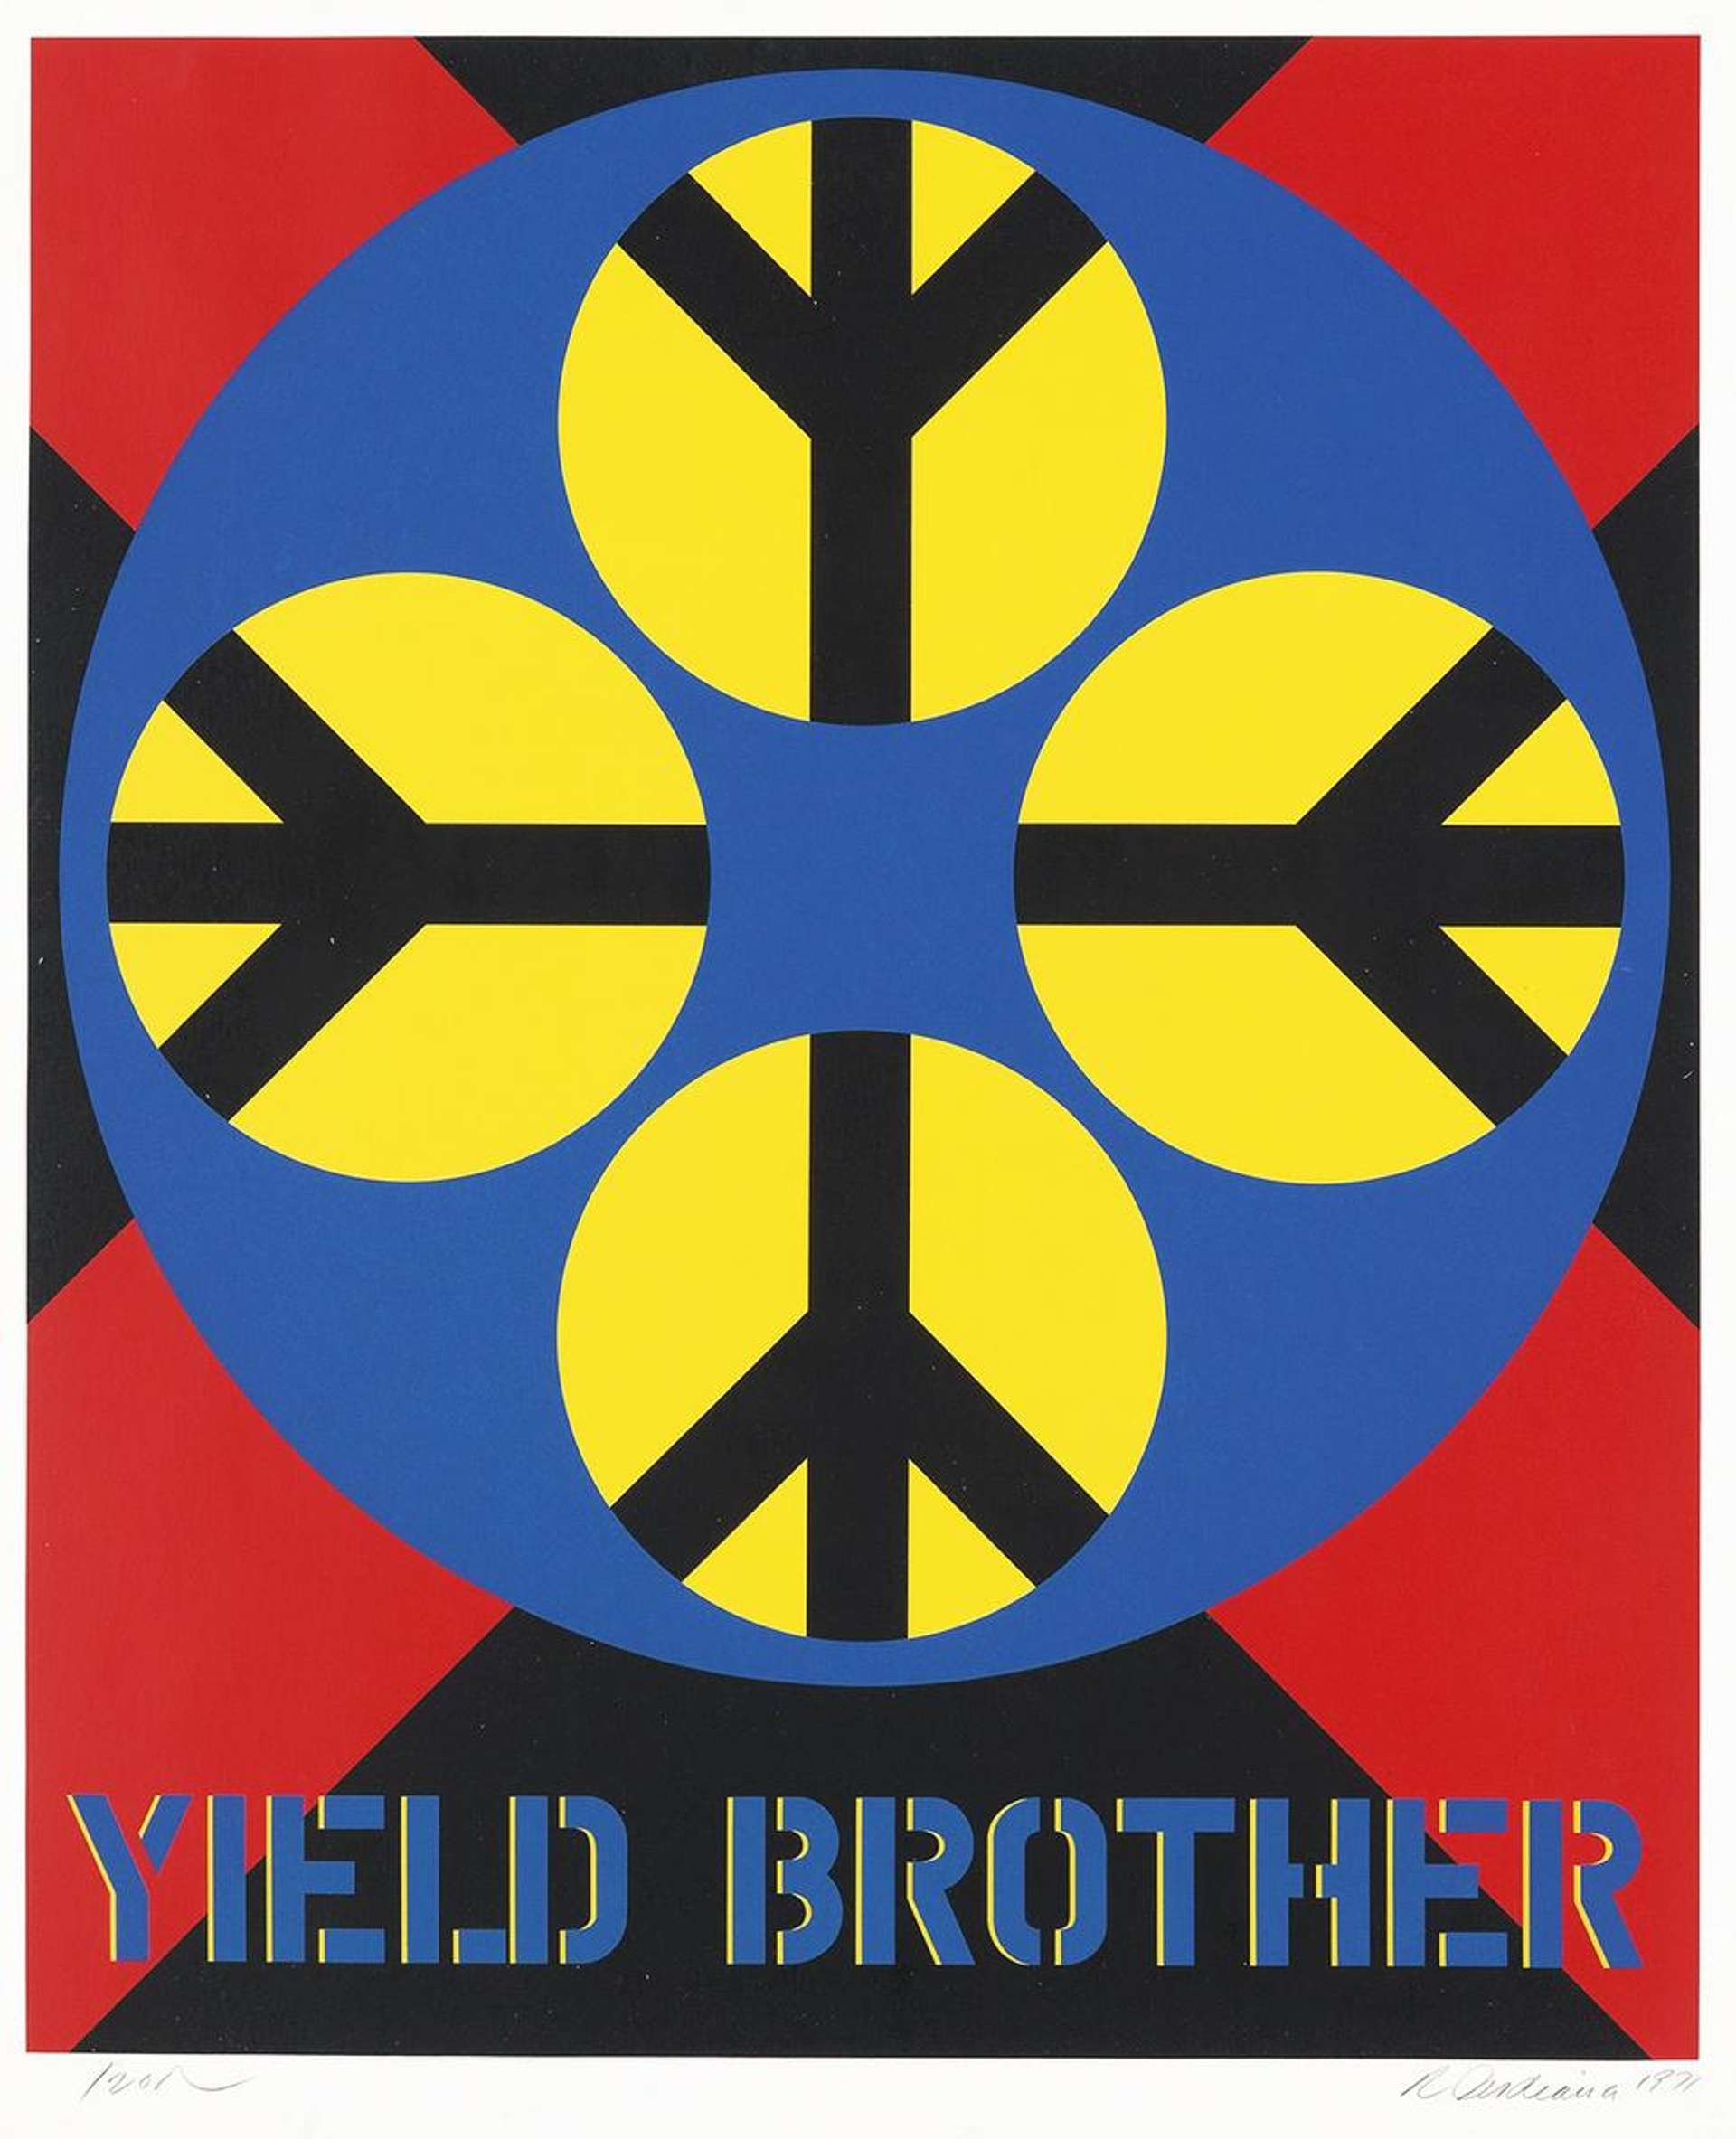 Robert Indiana: Decade (Yield Brother) - Signed Print